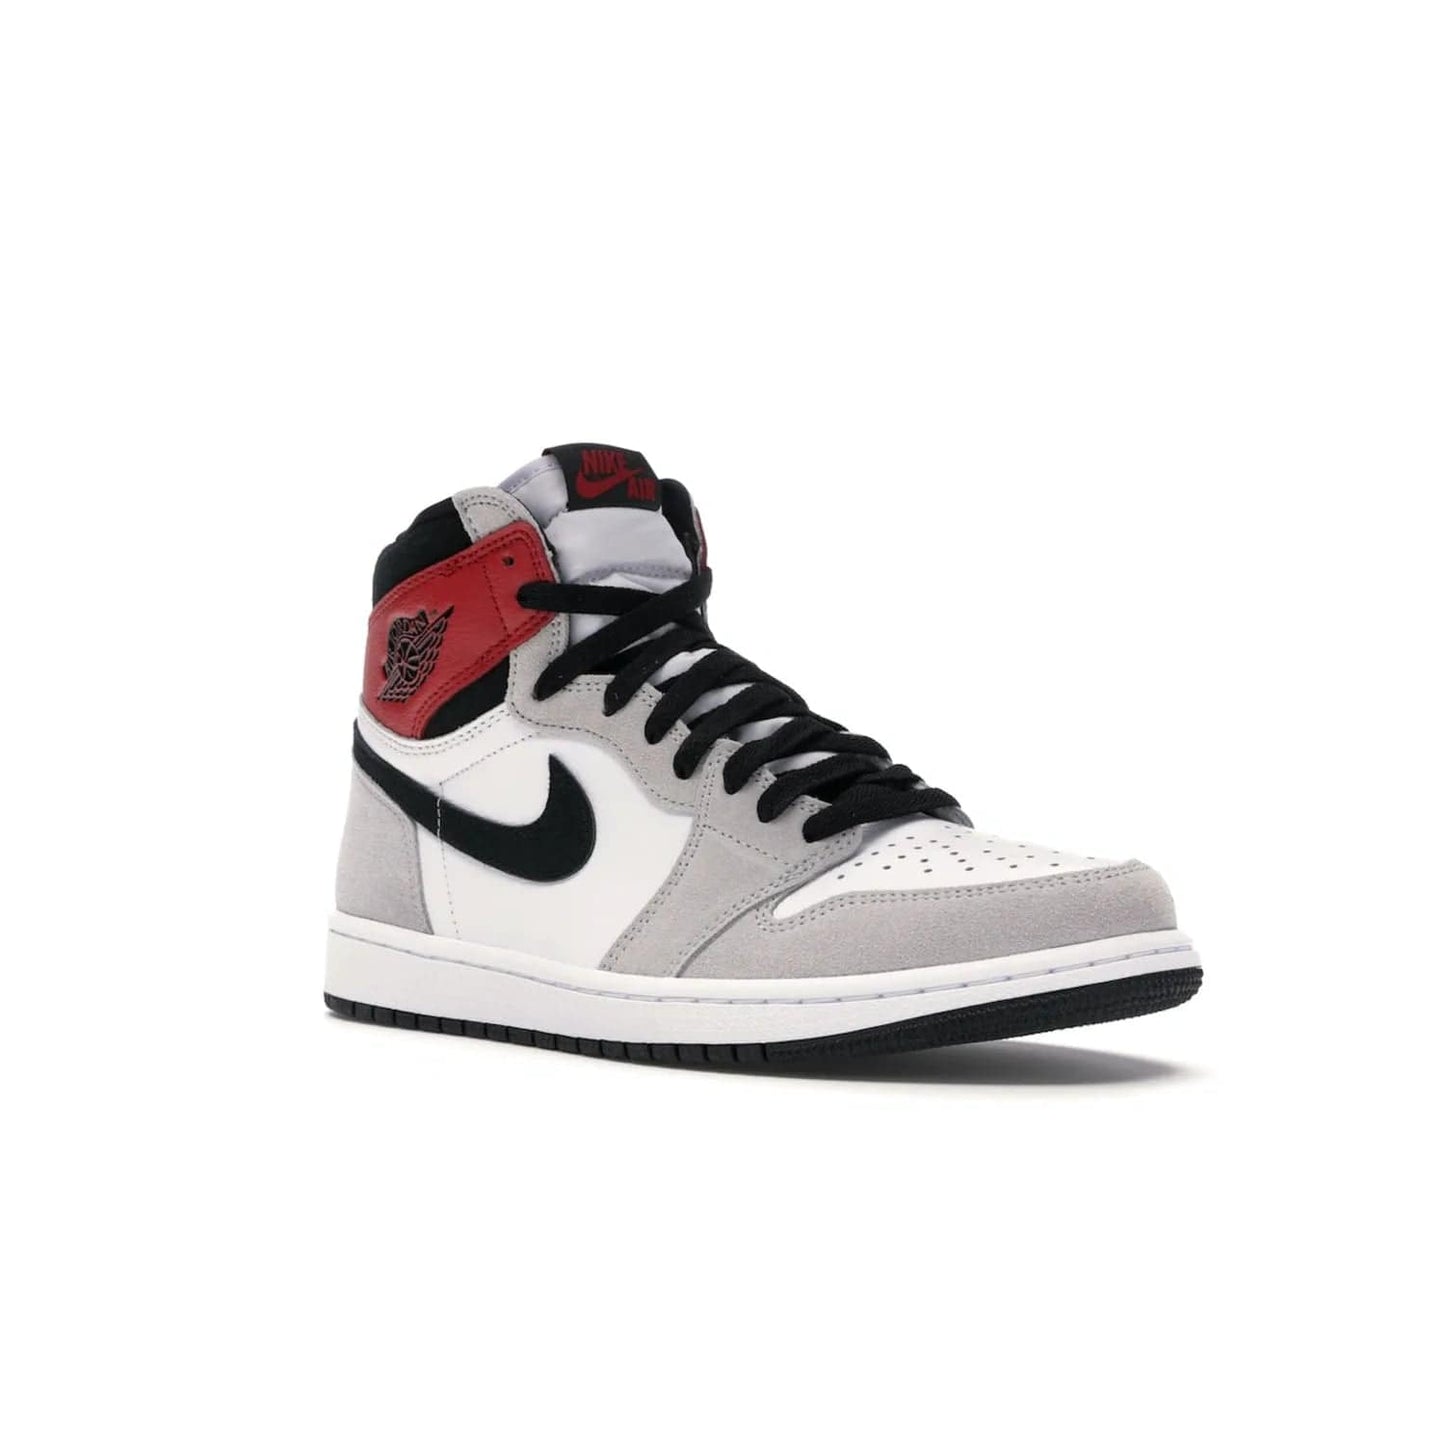 Jordan 1 Retro High Light Smoke Grey - Image 5 - Only at www.BallersClubKickz.com - Comfortable and stylish, Jordan 1 Retro High Light Smoke Grey offers a unique spin on a classic design. White leather, grey suede, red leather and black details are set on a white midsole and black outsole. Get the sneaker released in July 2020 and add a twist to your wardrobe.